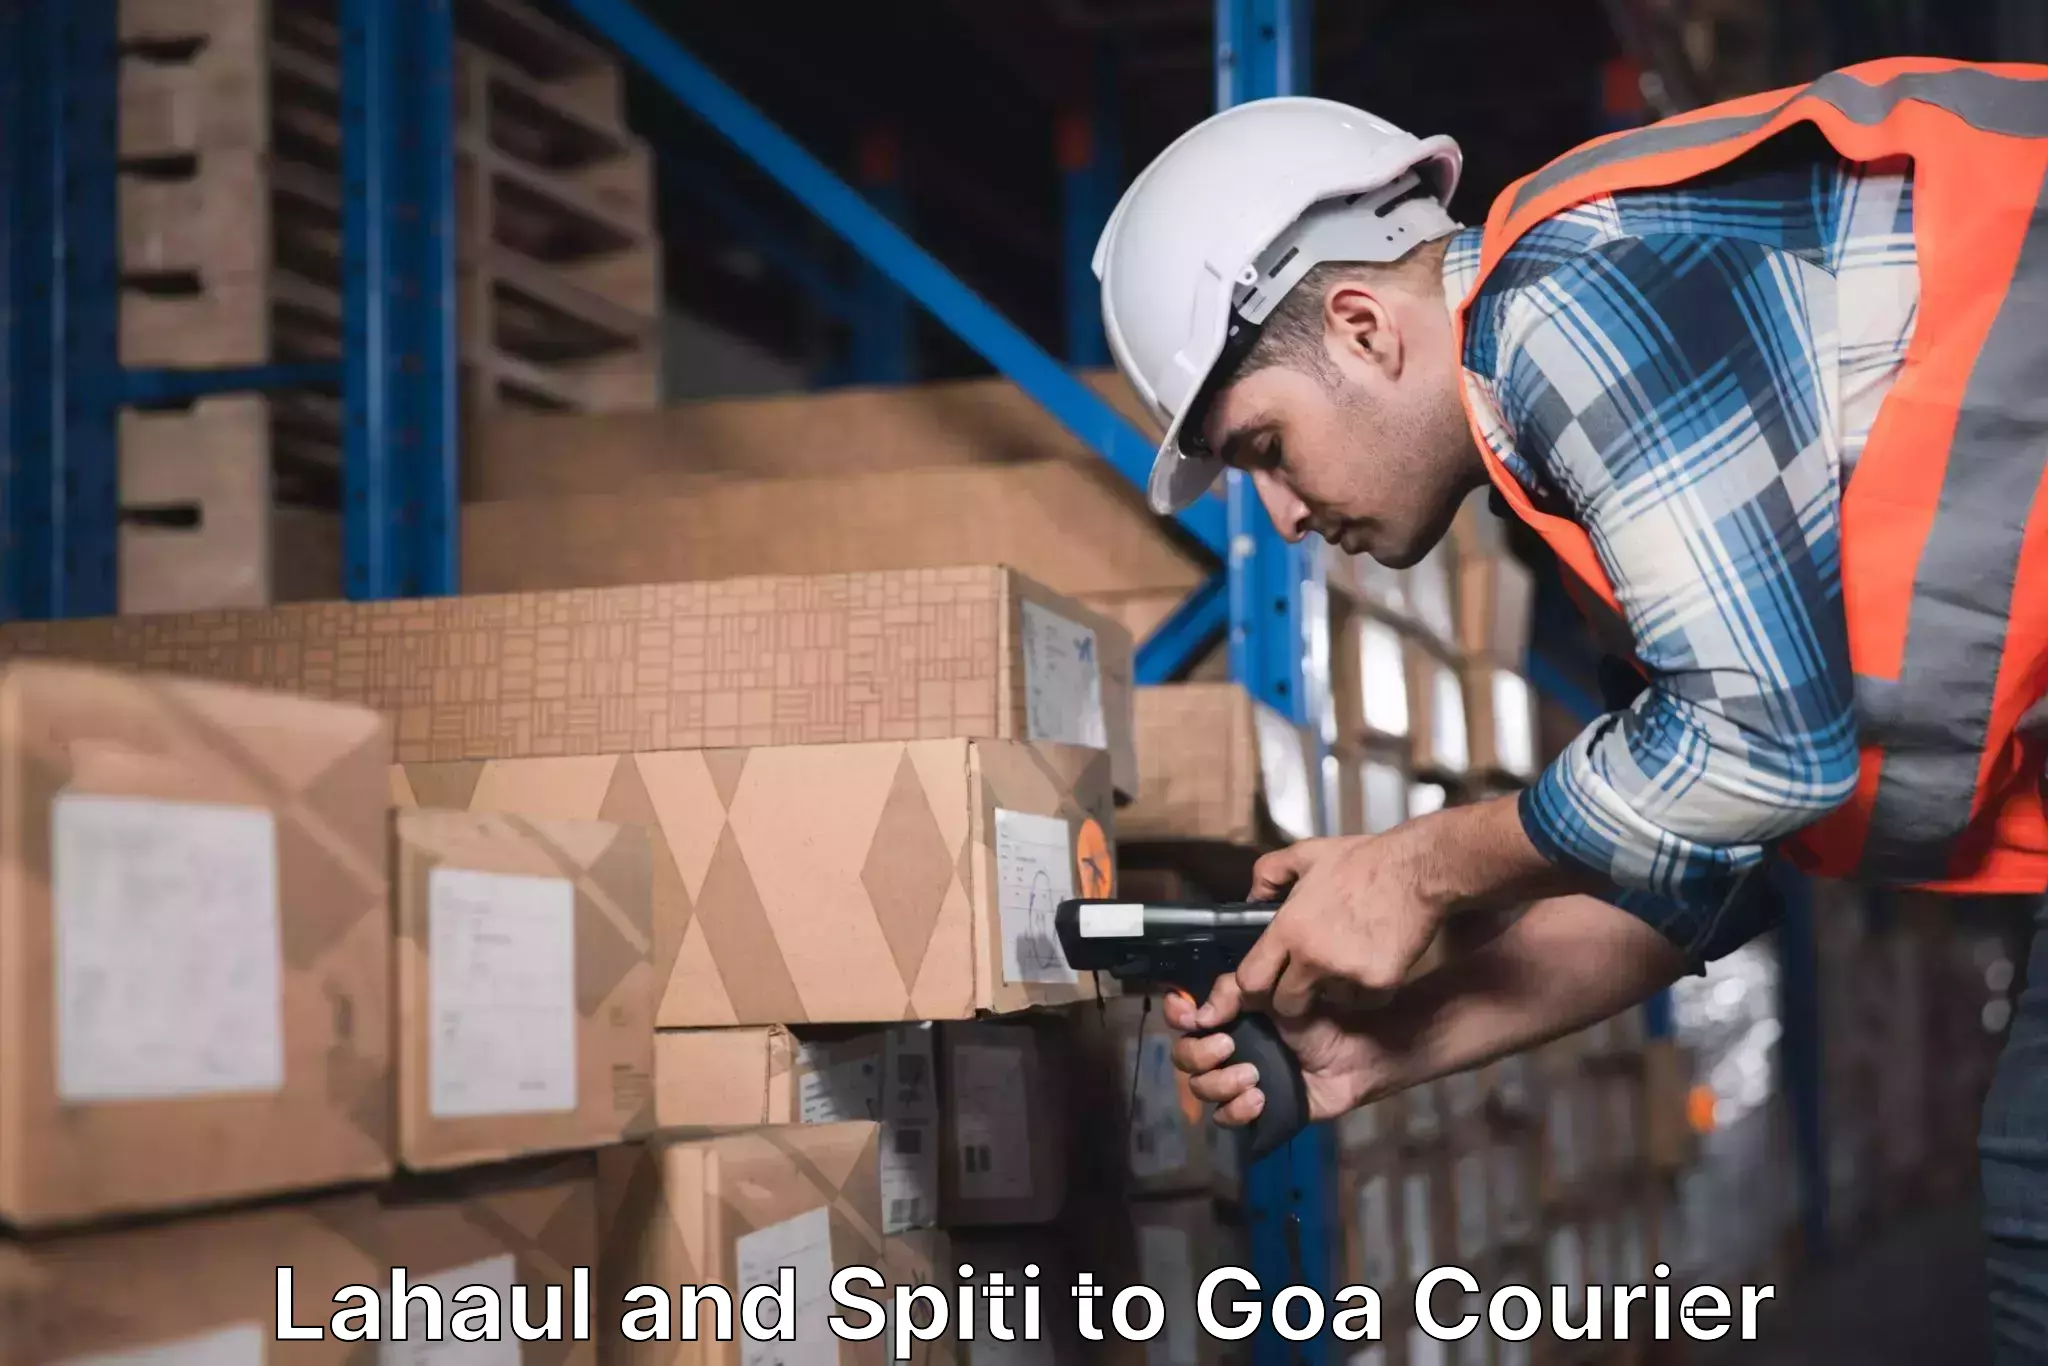 International courier networks Lahaul and Spiti to Goa University